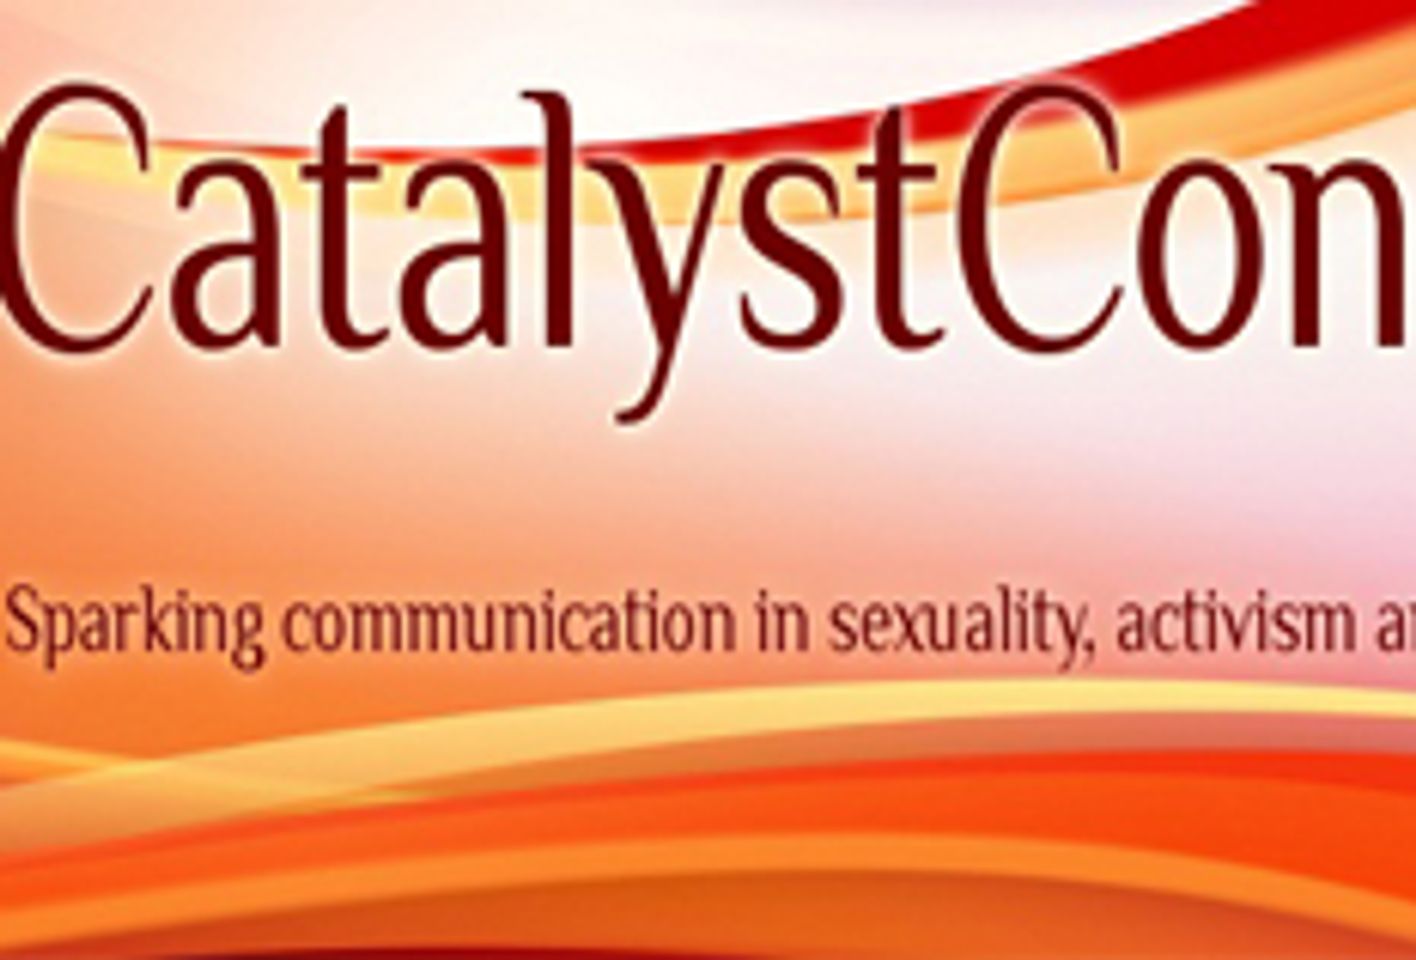 CatalystCon’s Dee Dennis Hops In Bed With Jessica Drake